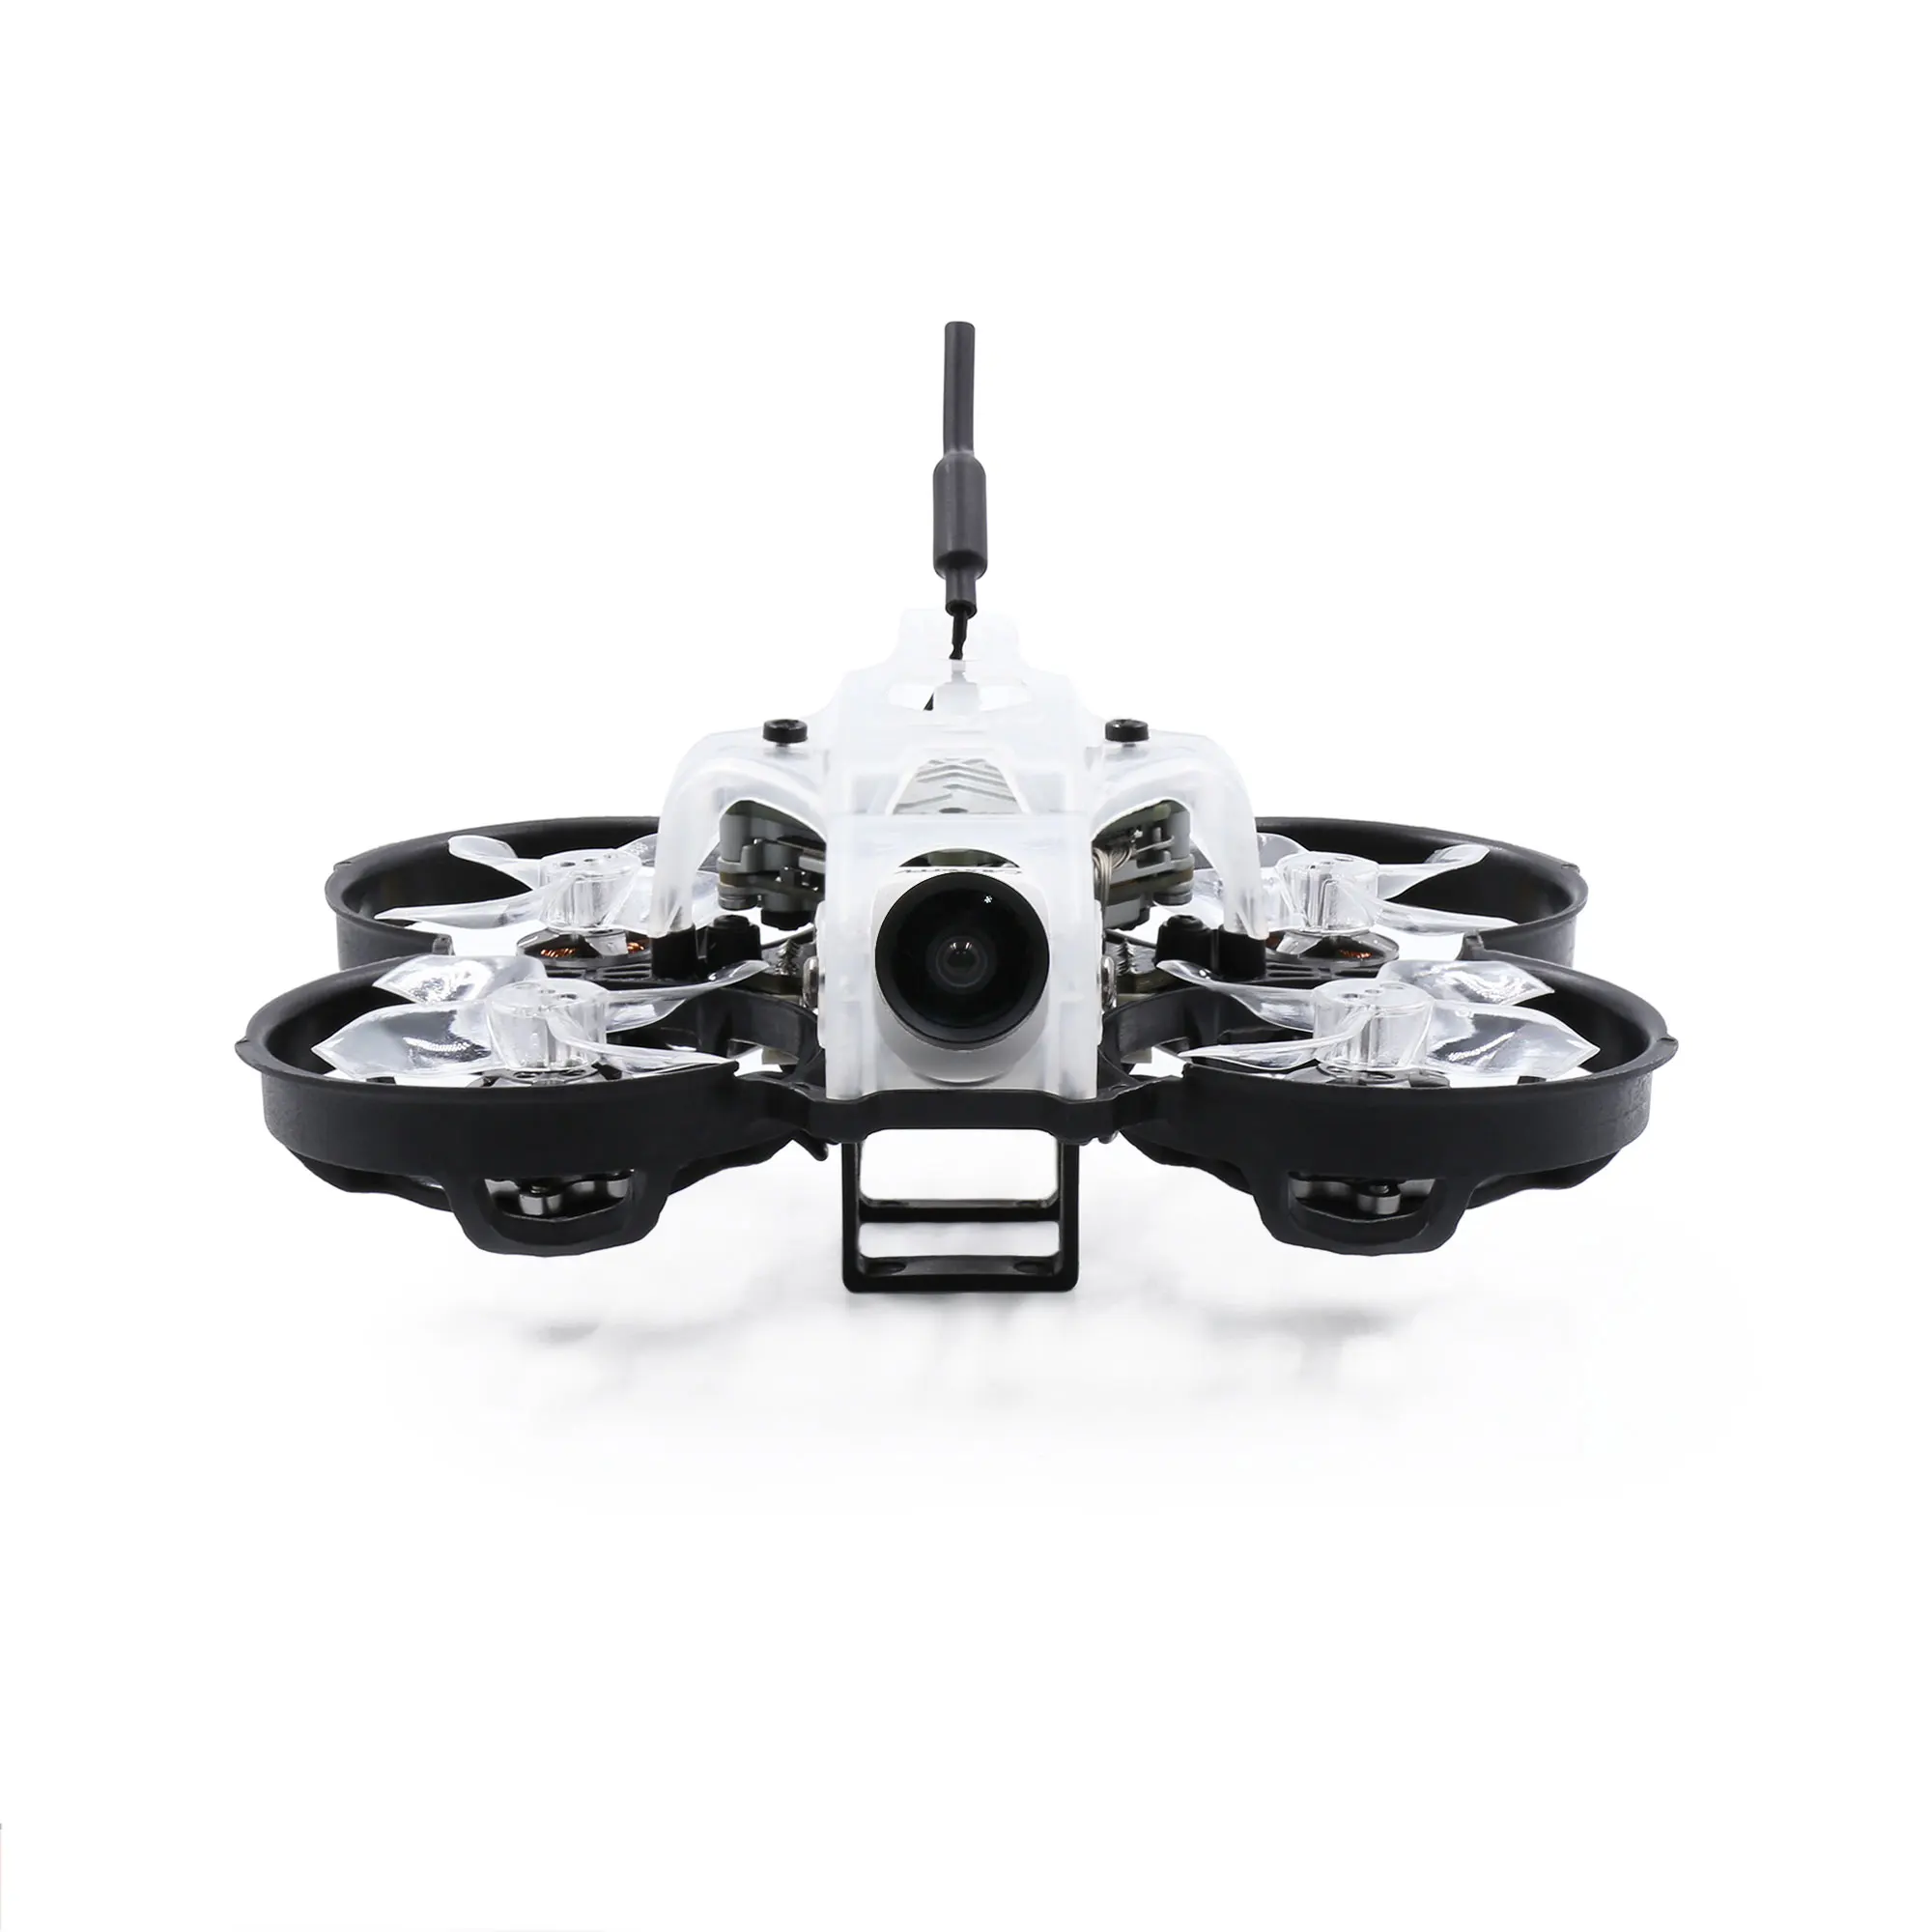 GEPRC Thinking P16 HD GEP-12A-F4 AIO Caddx Vista Nebula GR1103 8000KV 3S 79mm 1.6inch FPV Tinywhoop Cinewhoop Drone 2